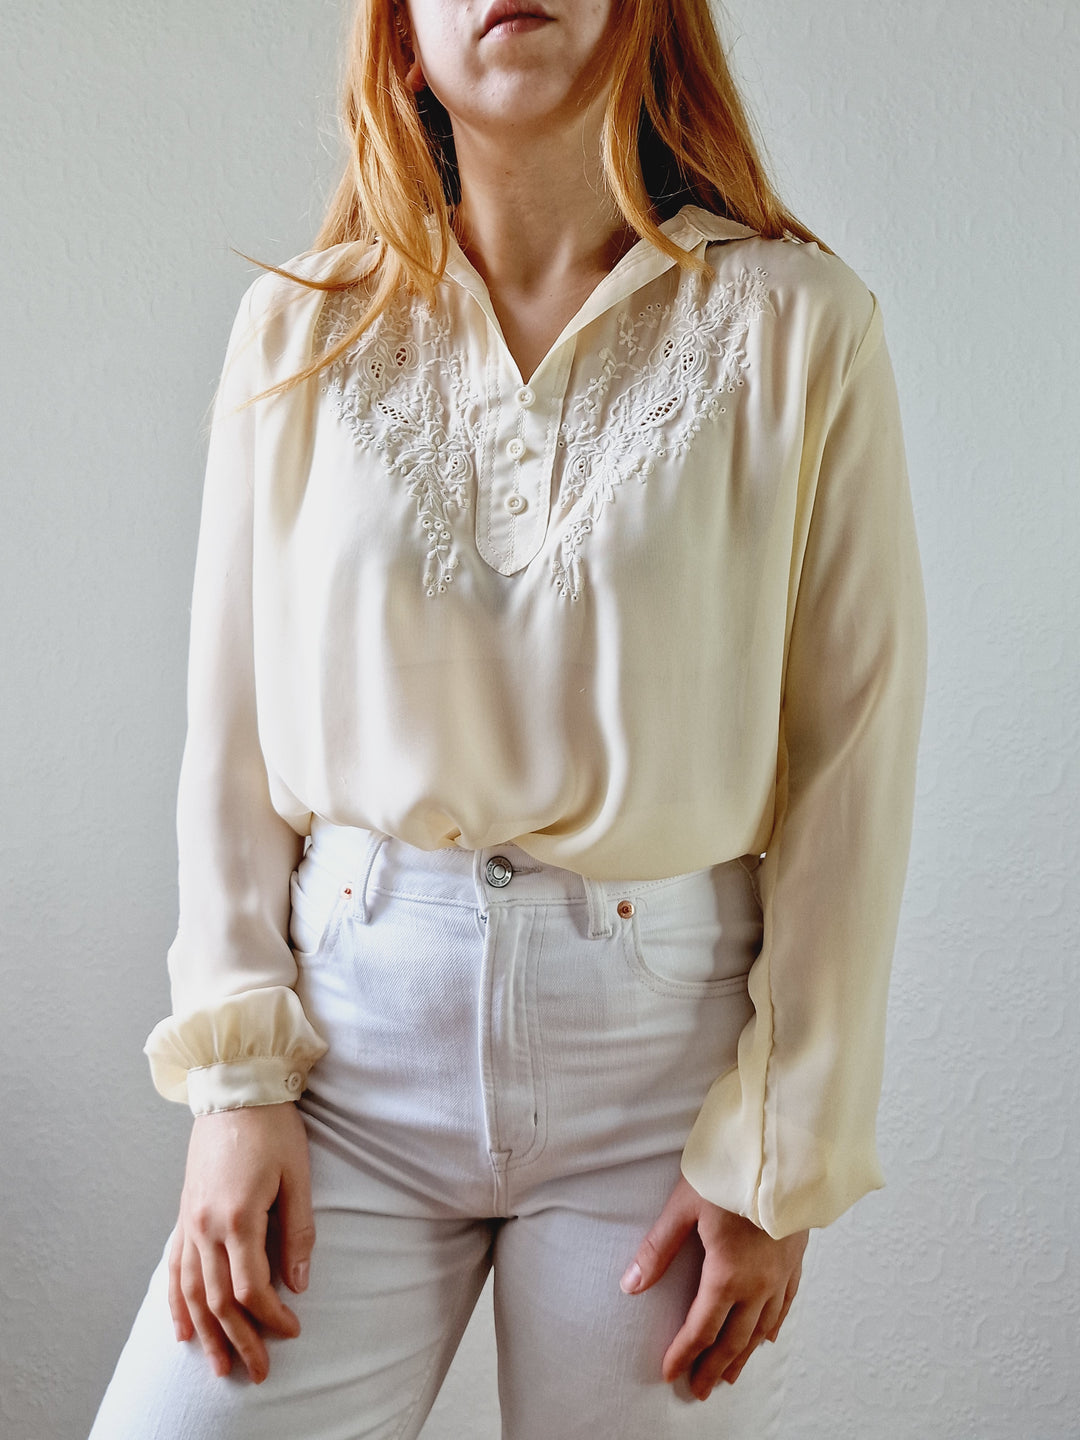 Vintage 80s Pale Yellow Long Sleeve Collared Blouse with Embroidery Detail - S/M